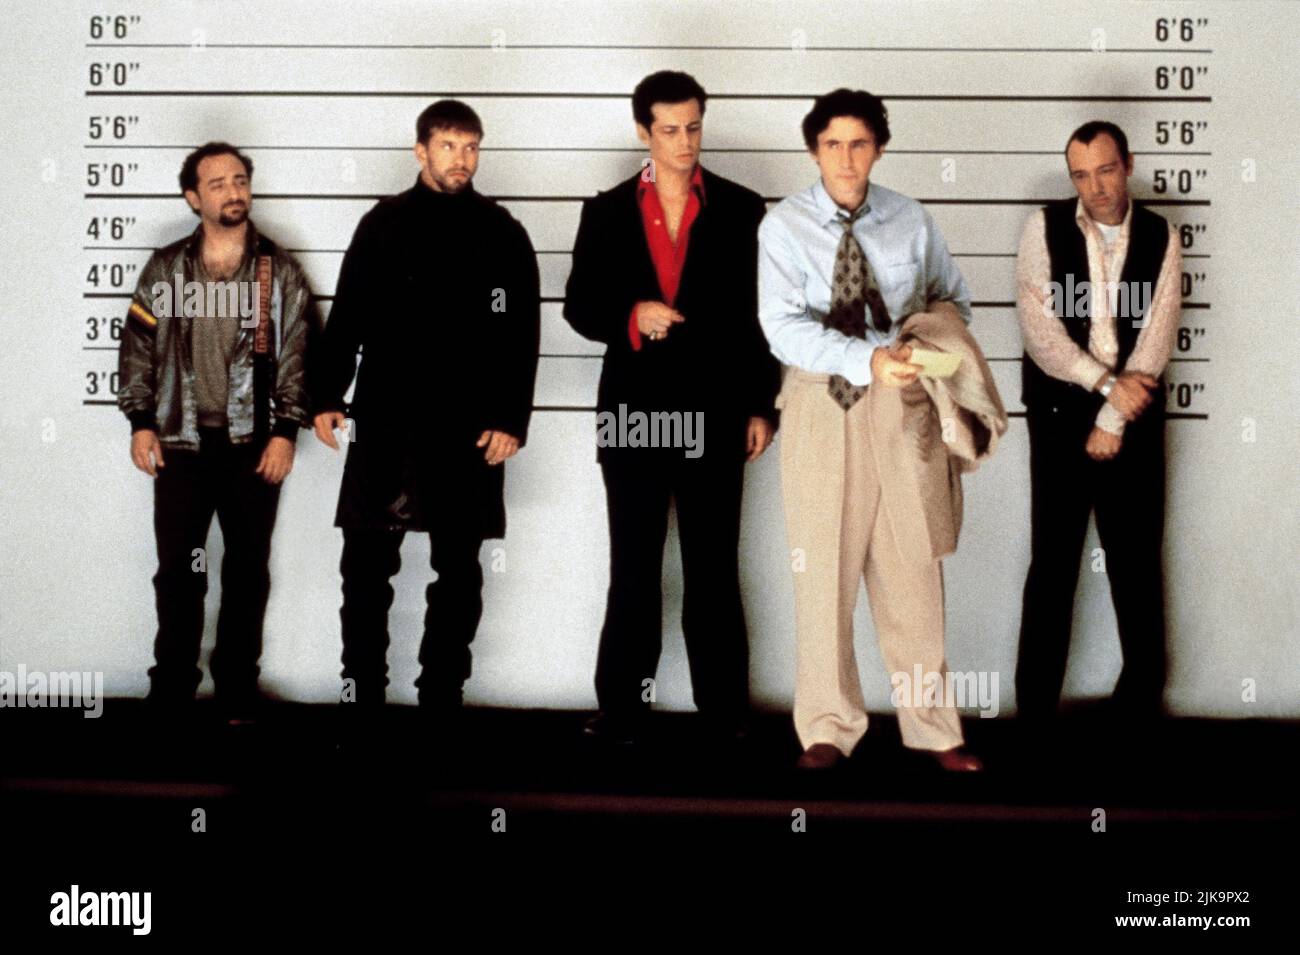 The Usual Suspects': Why Stephen Baldwin and Kevin Spacey Couldn't Stop  Laughing During the Famous Lineup Scene